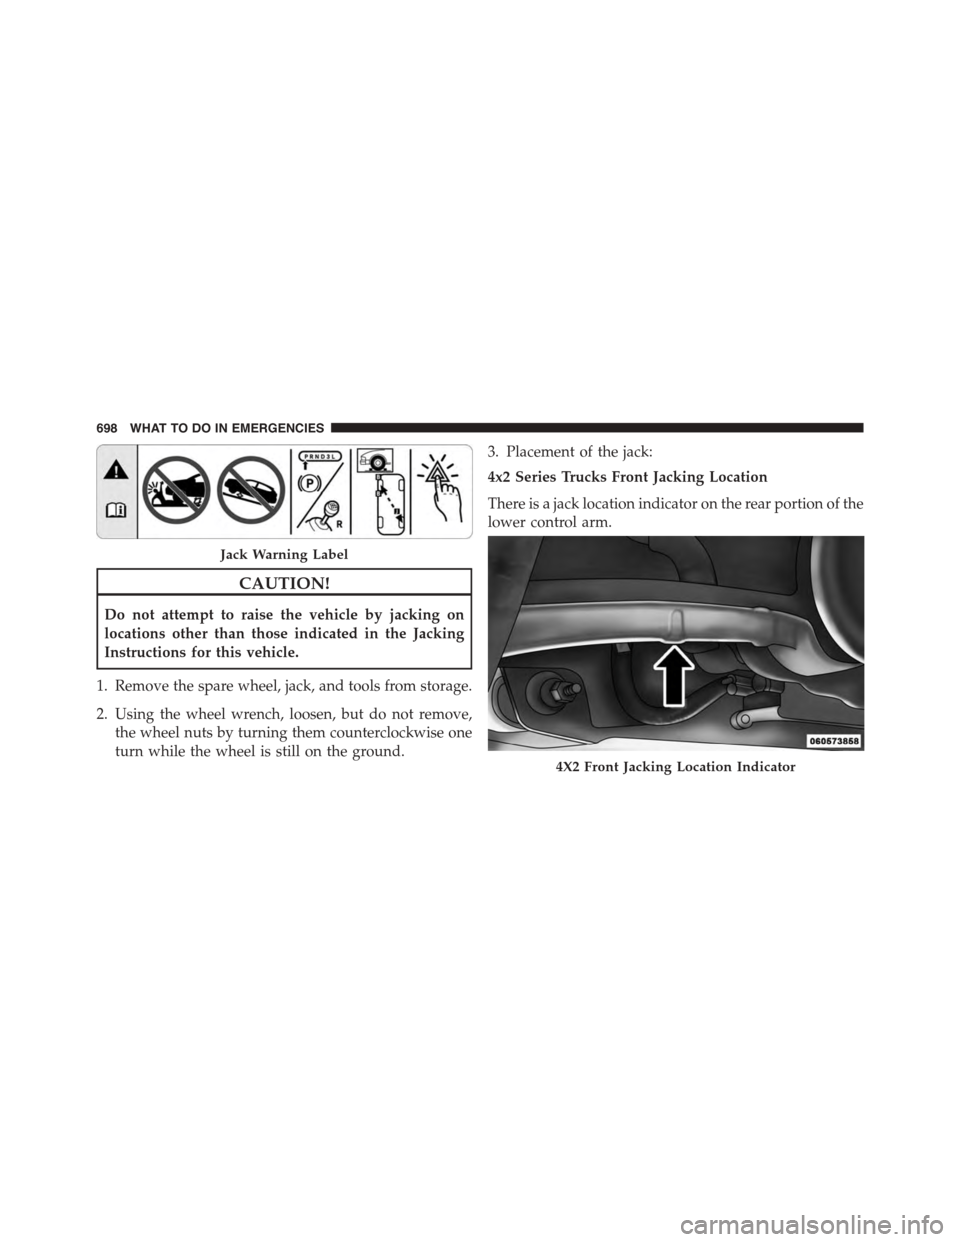 Ram 1500 2015  Owners Manual CAUTION!
Do not attempt to raise the vehicle by jacking on
locations other than those indicated in the Jacking
Instructions for this vehicle.
1. Remove the spare wheel, jack, and tools from storage.
2